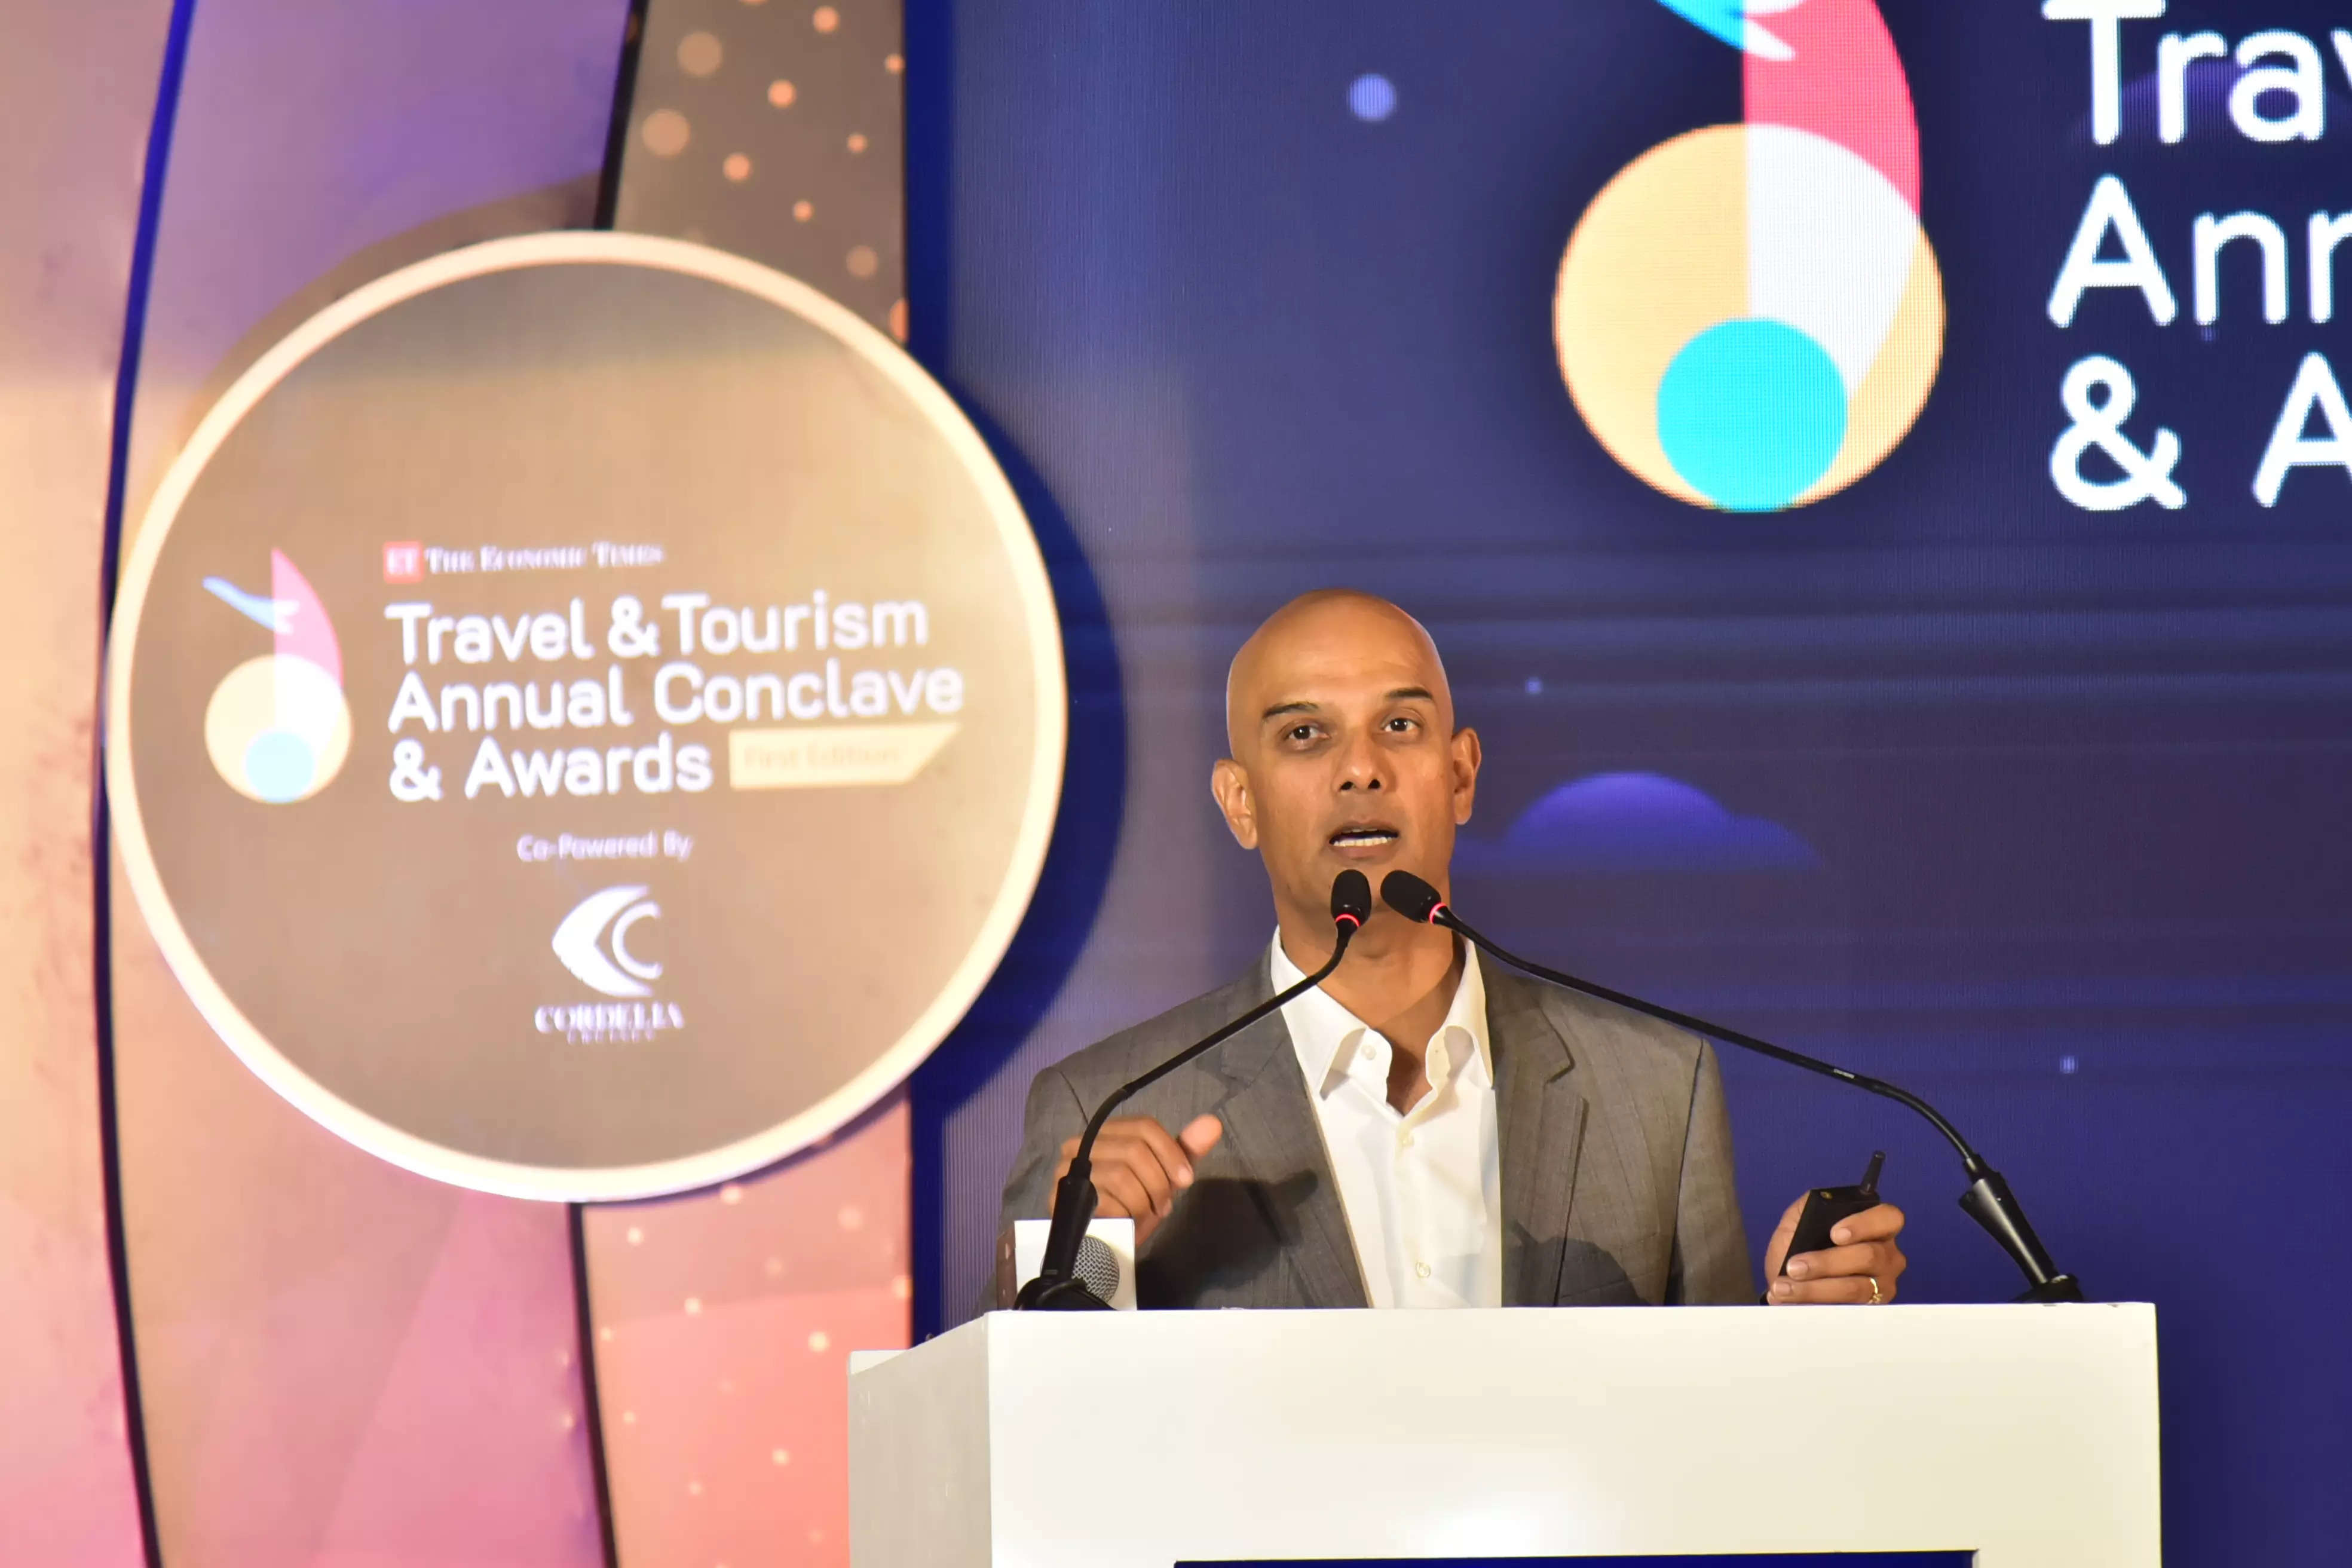 Experiences, not destinations: Mastercard Report cites 34% increase in tourism spending